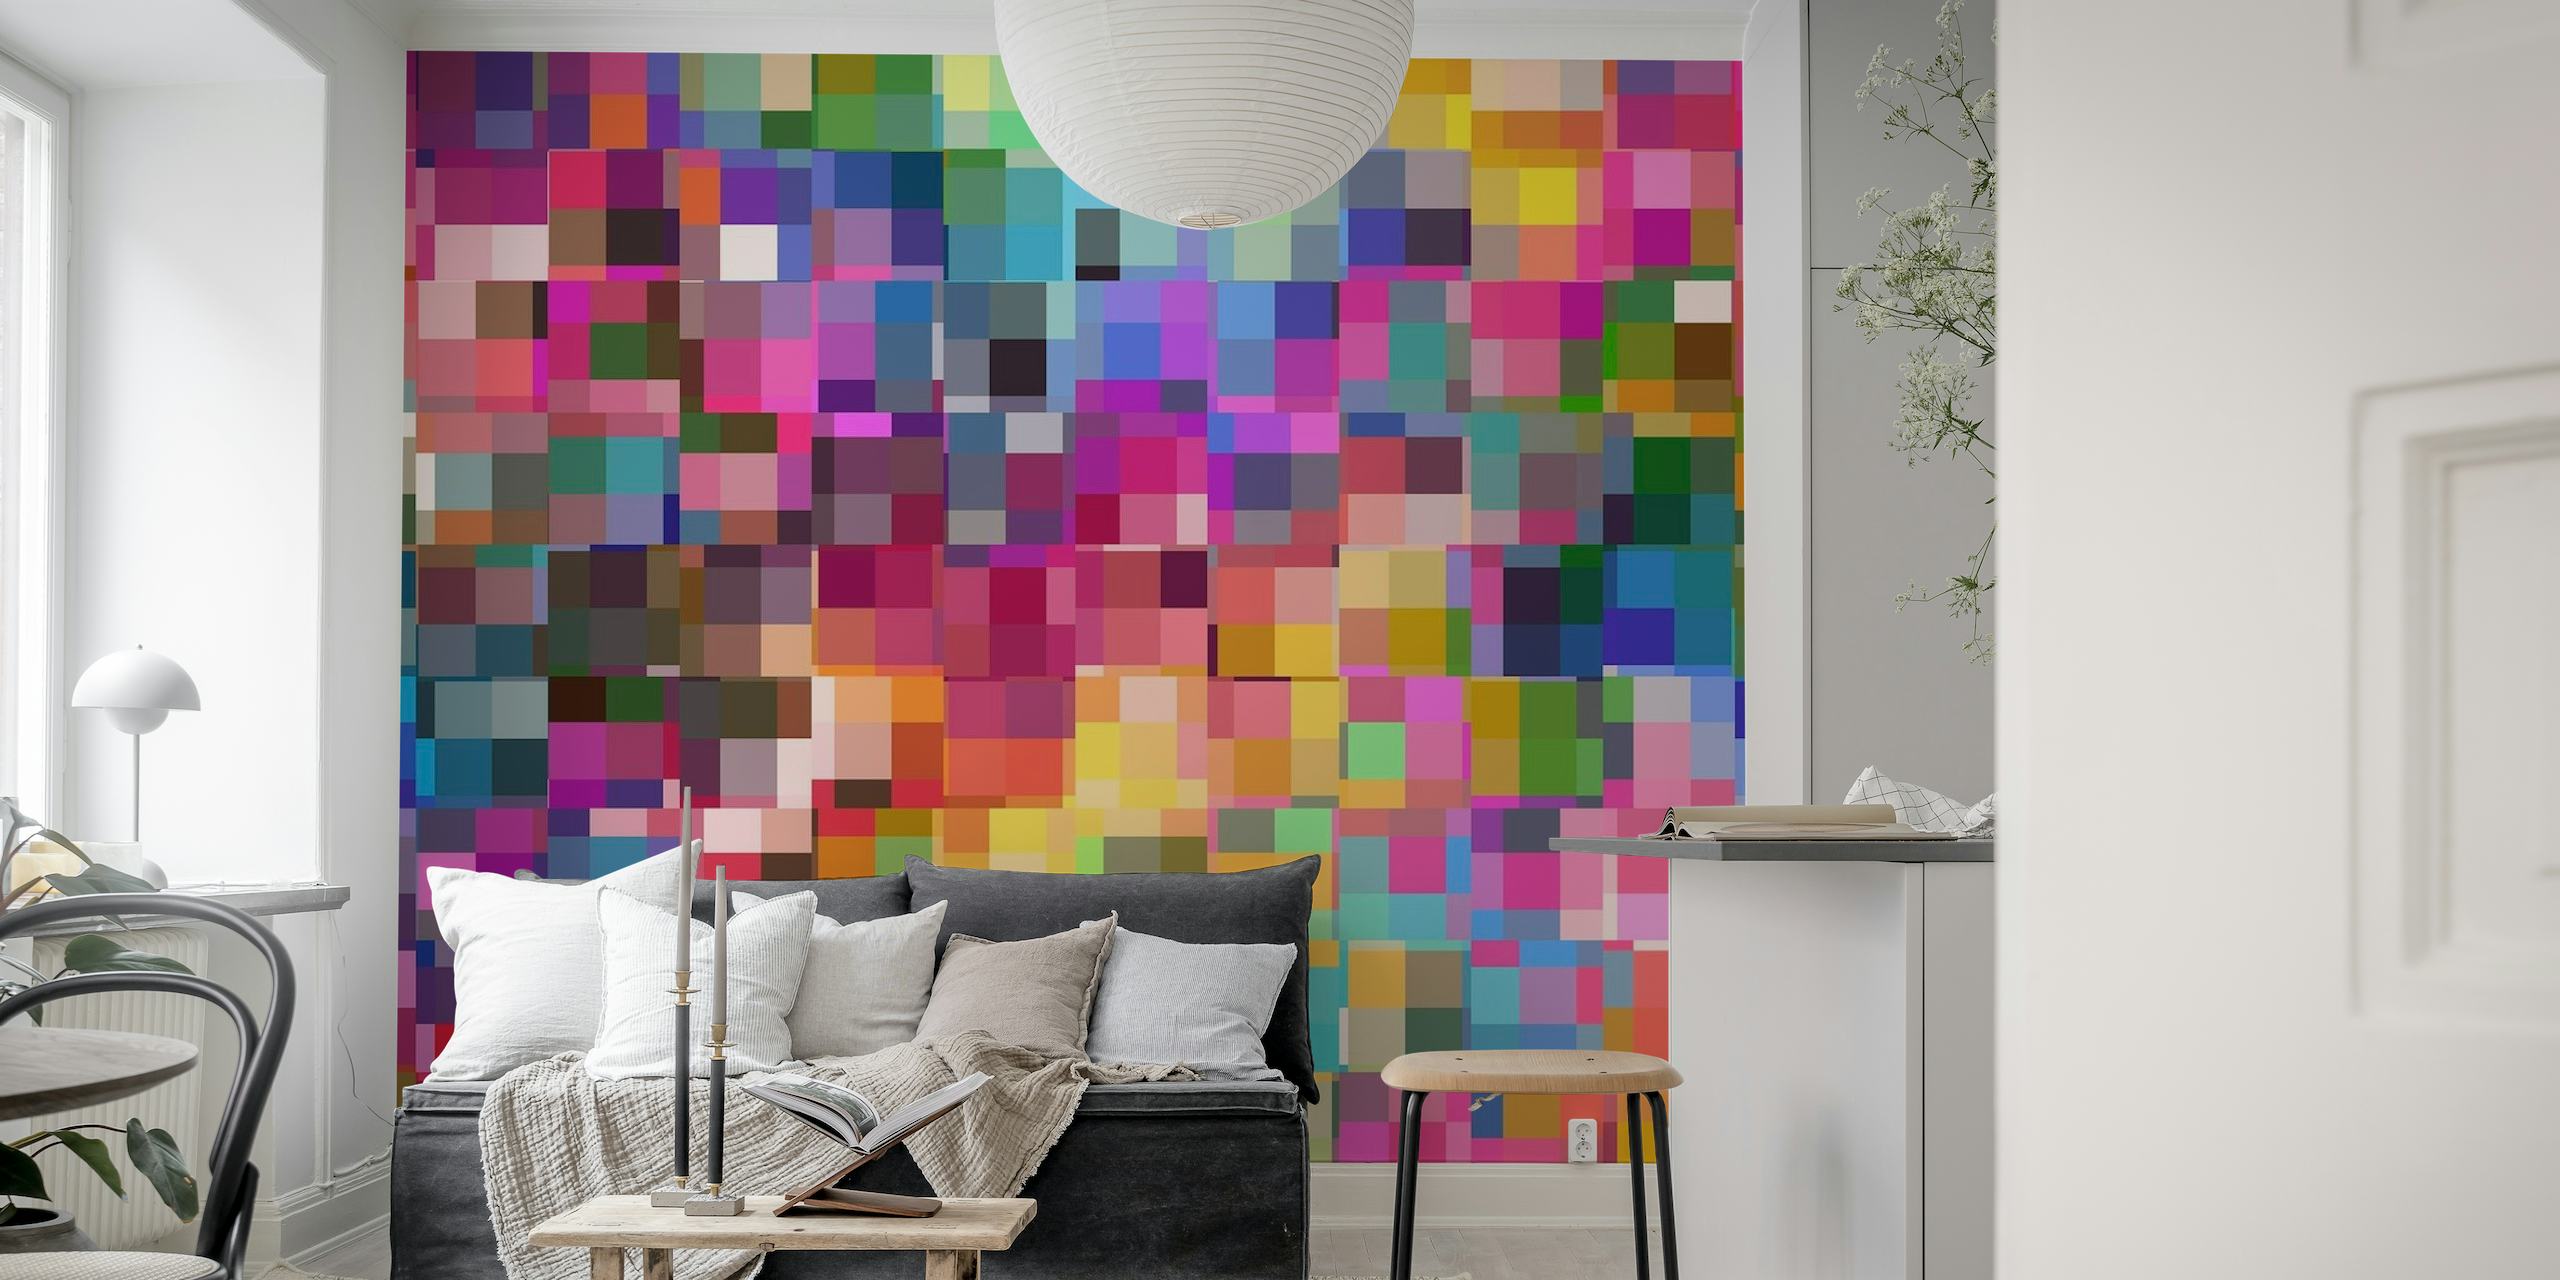 Abstract colorful square mosaic wall mural called 'Artists Block'